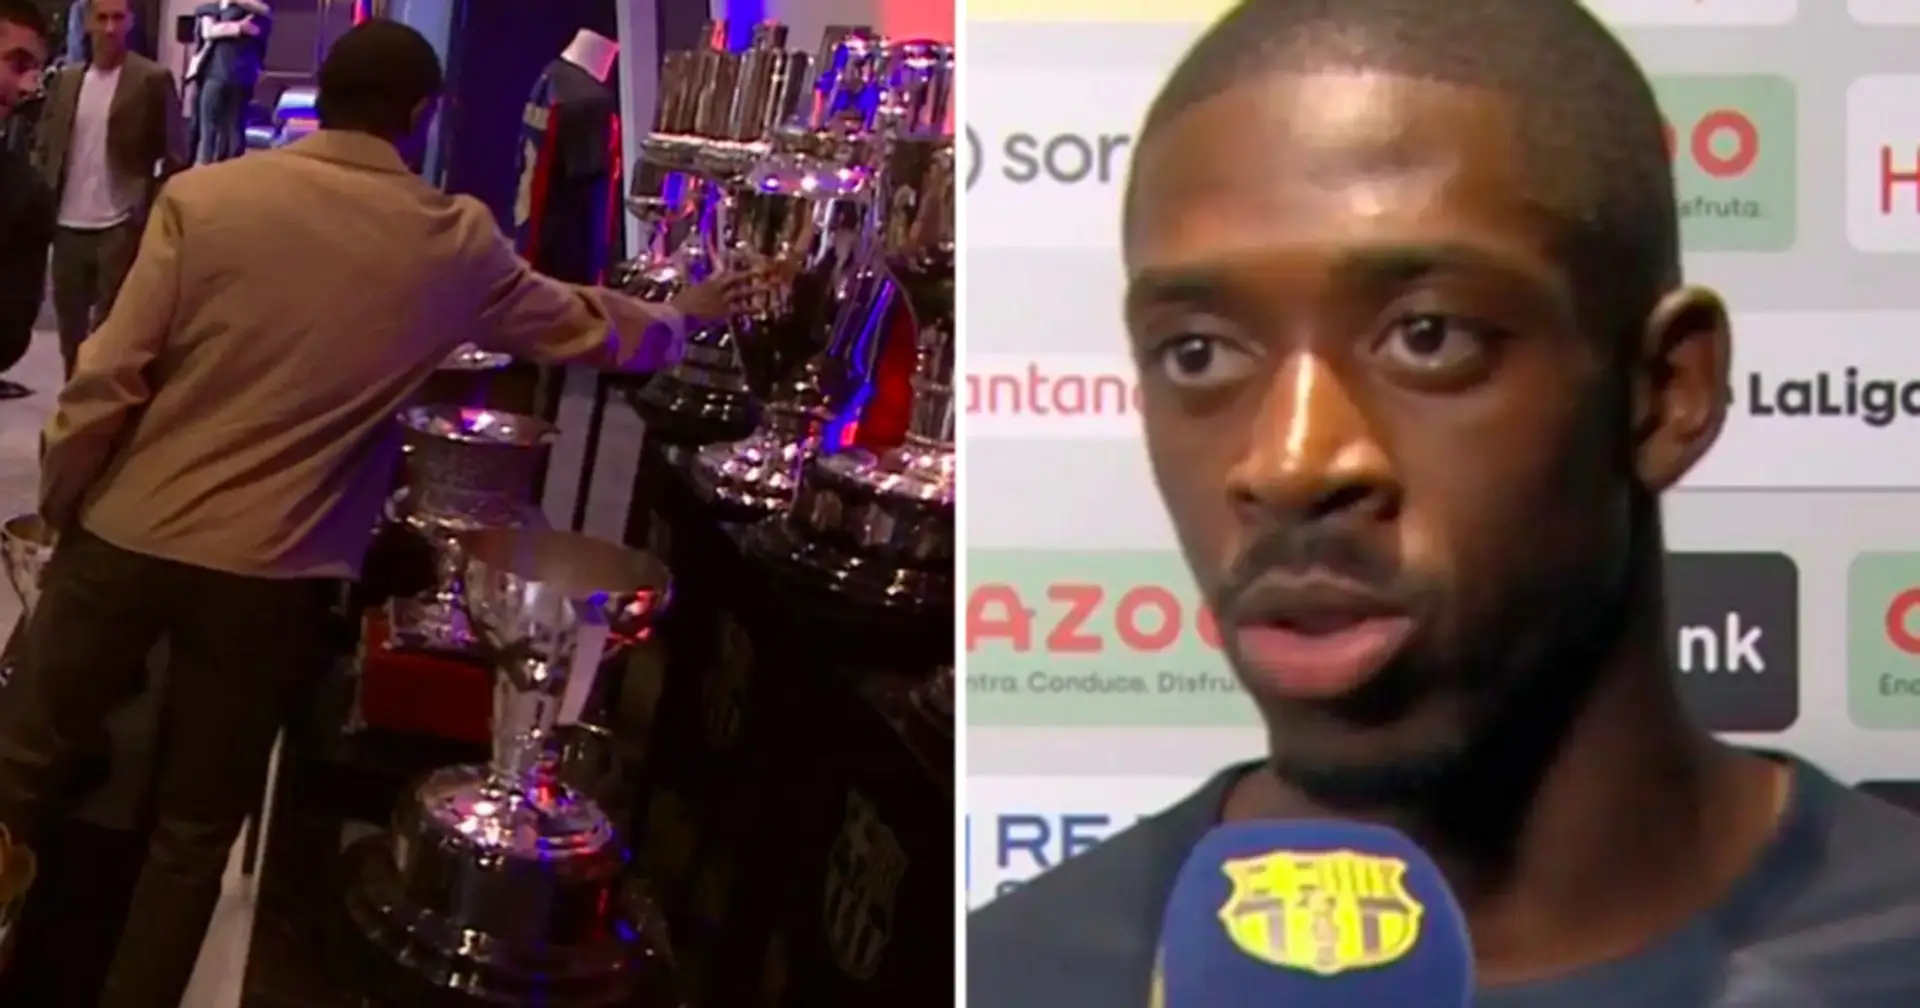 Caught on camera: Dembele touching Champions League trophy during Alba's farewell ceremony